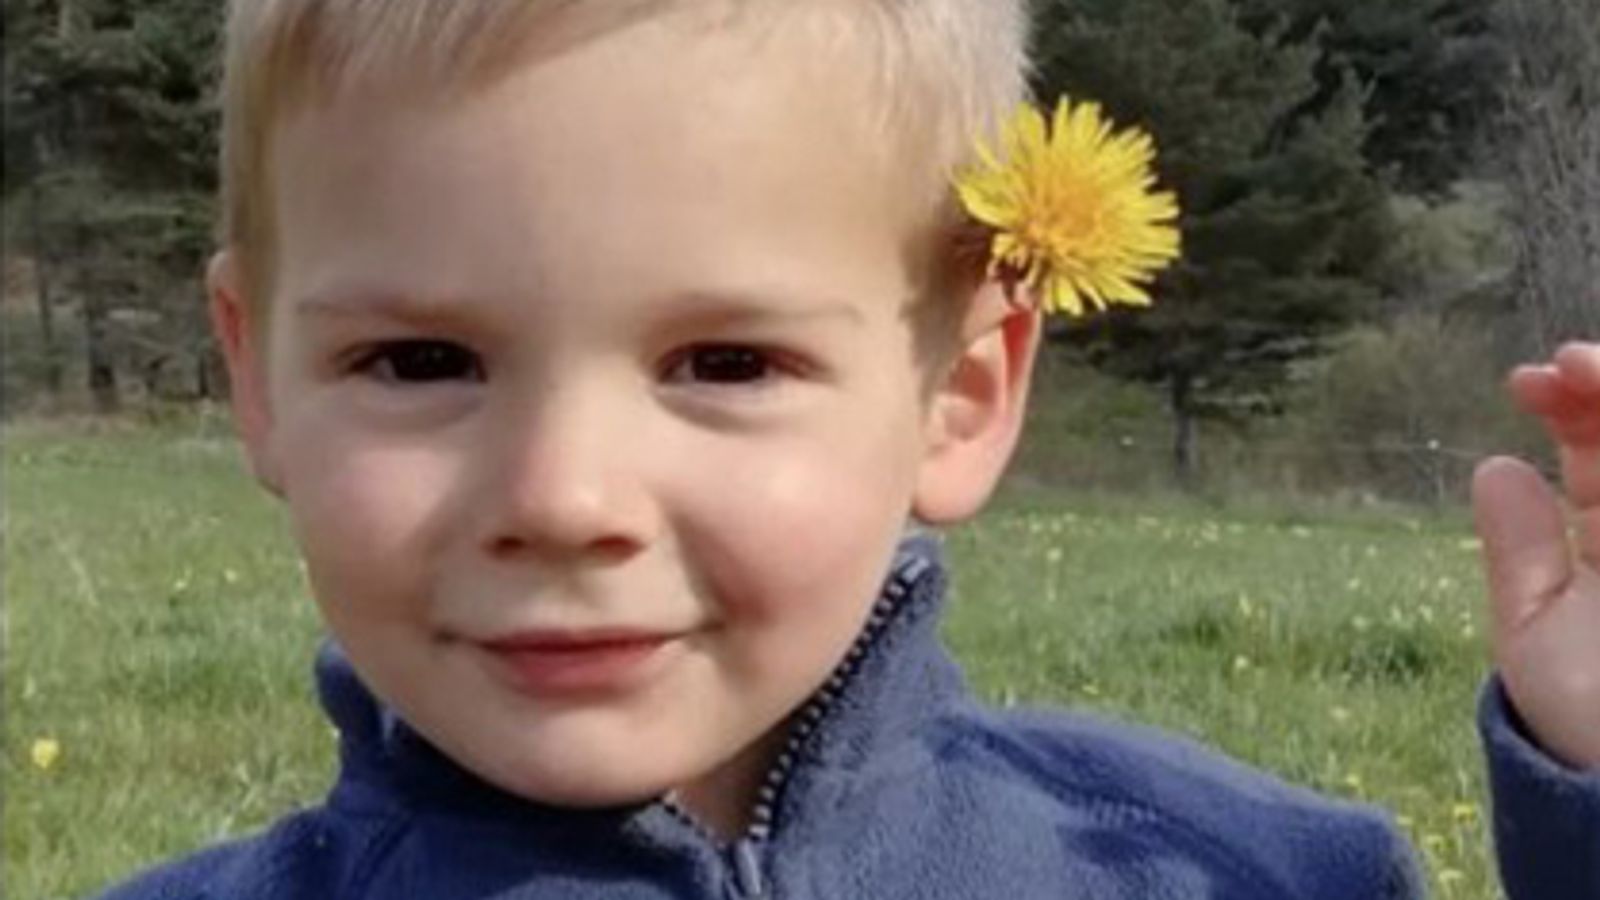 'Final sweep' search for missing two-year-old Emile in the French Alps